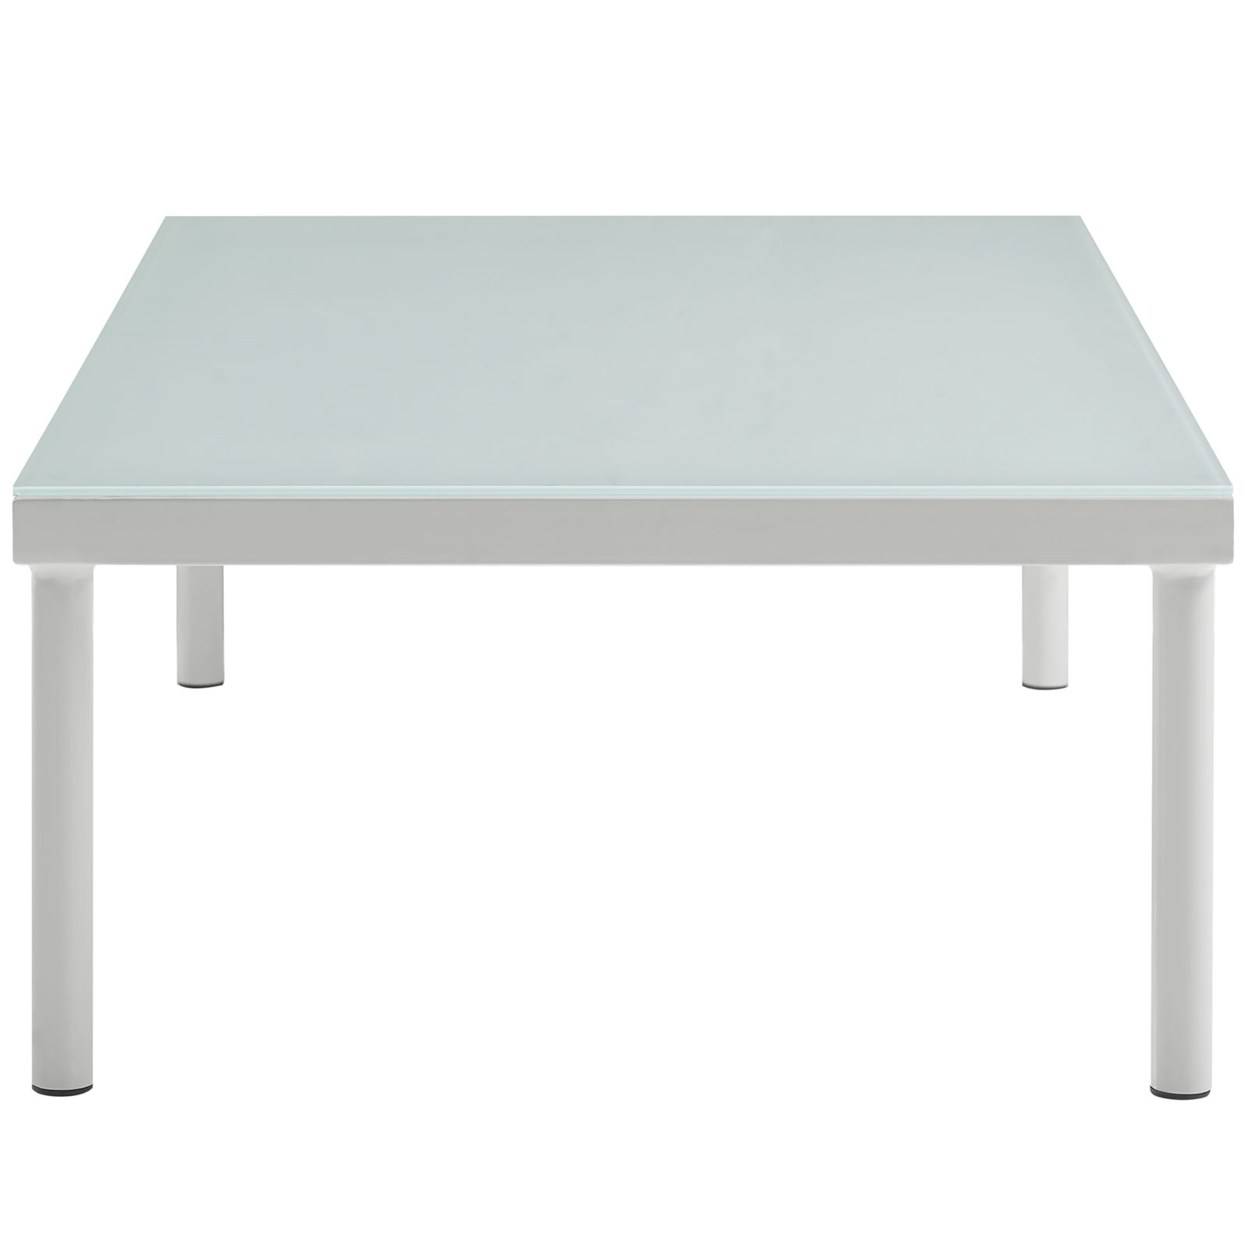 Modway Harmony Outdoor Patio Aluminum and Glass Coffee Table in White - image 3 of 4